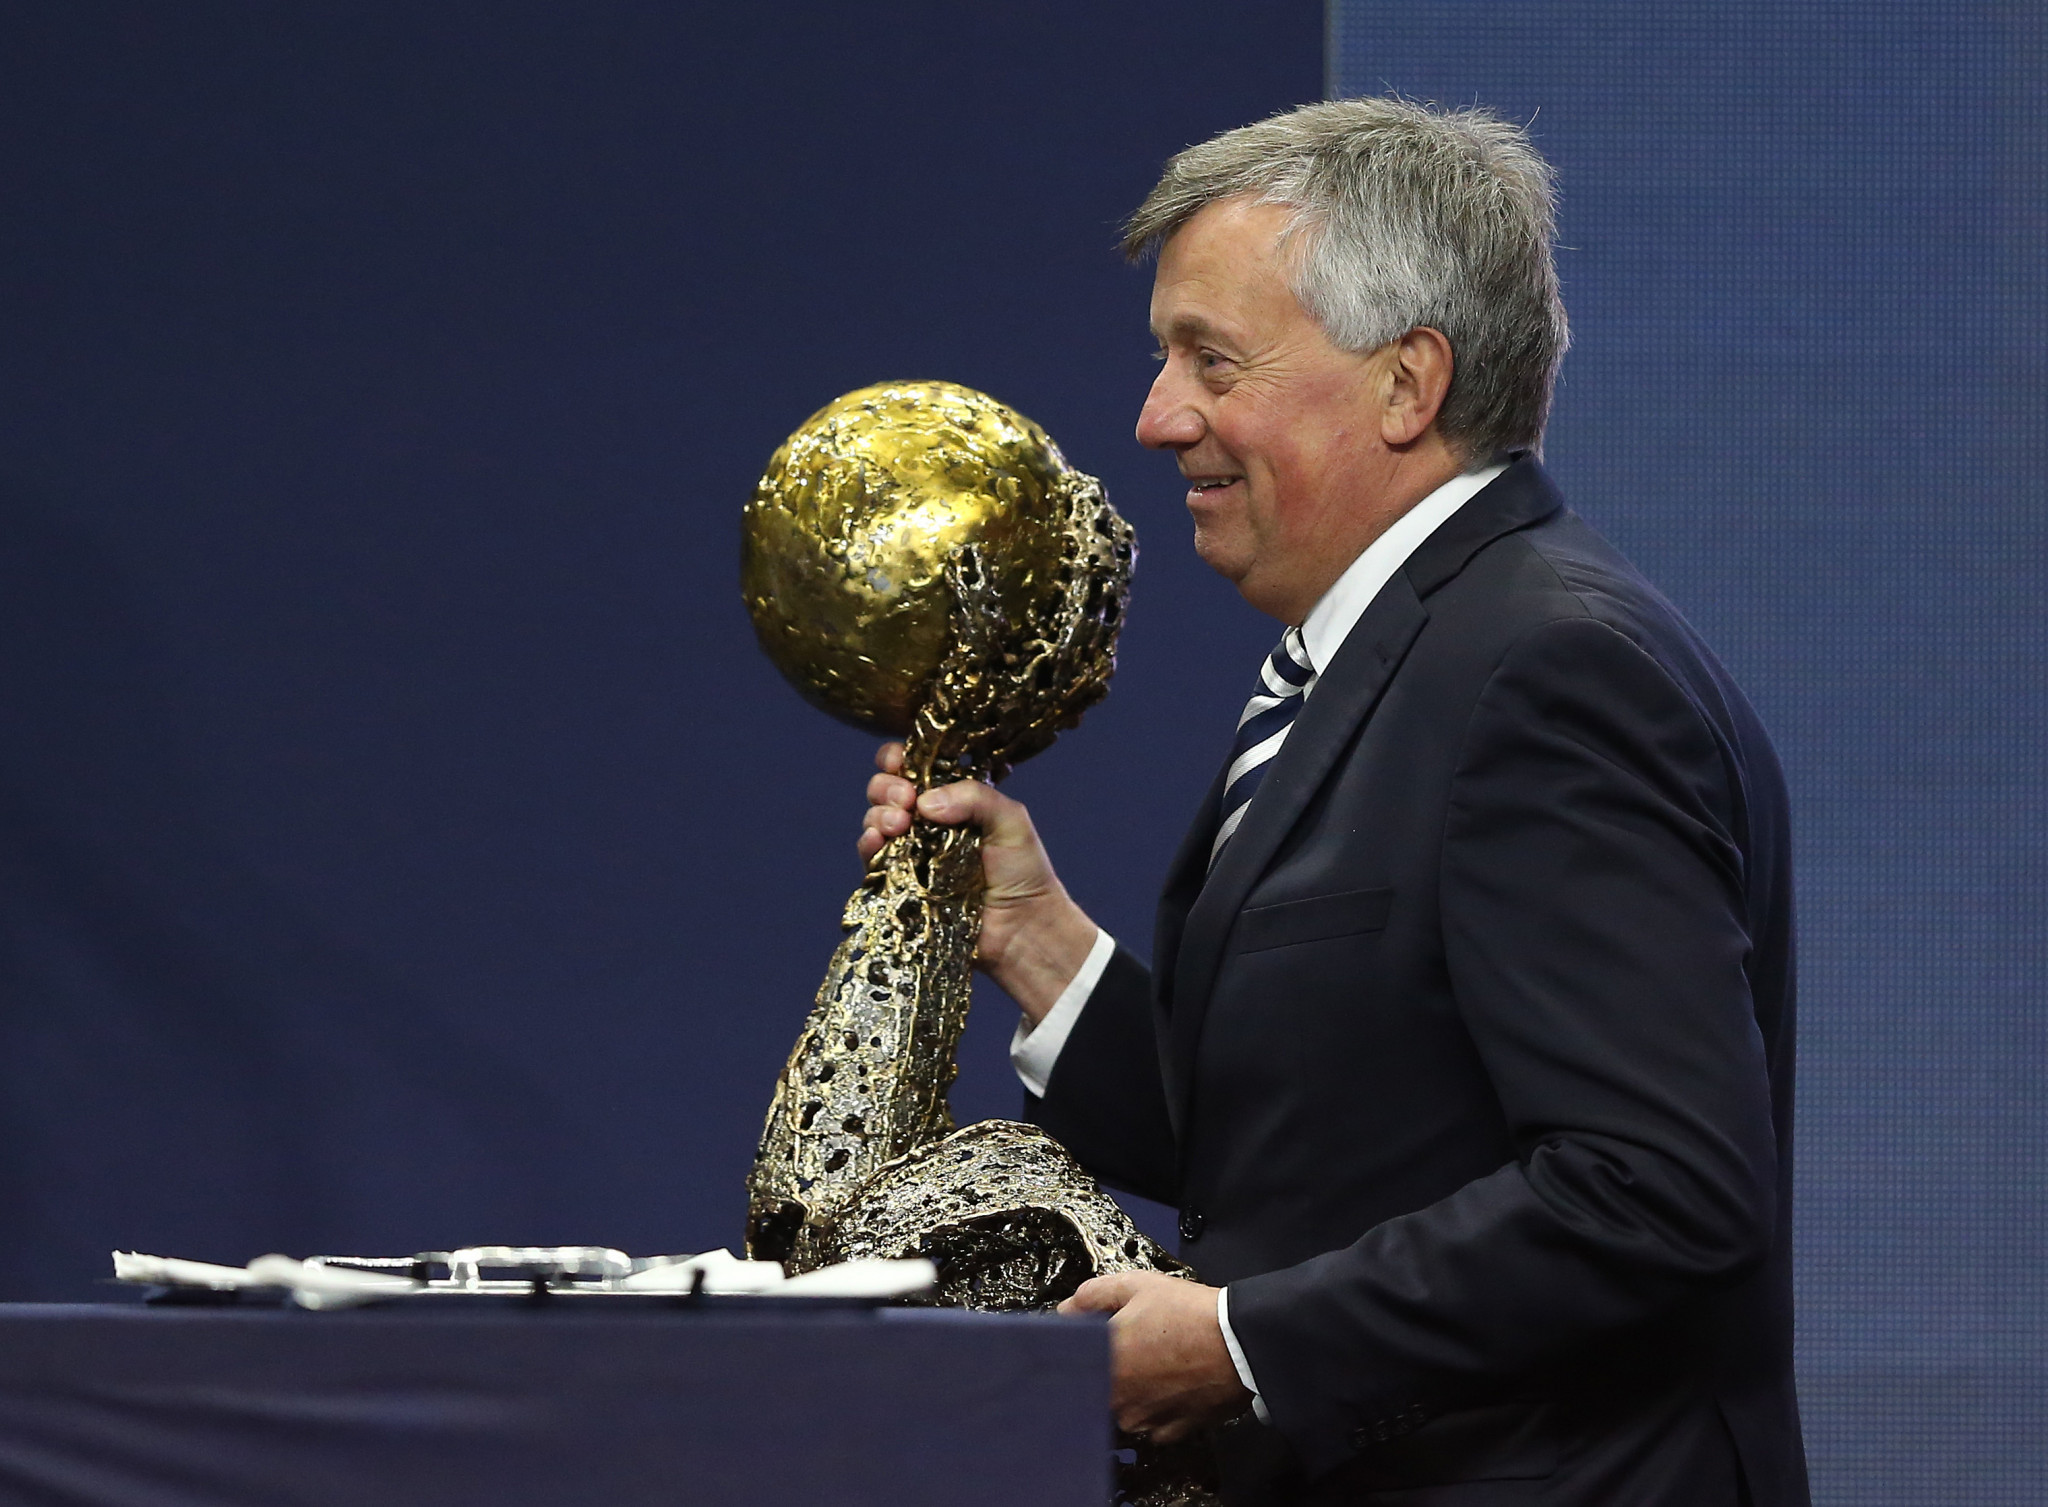 EHF President Michael Wiederer revealed the under-19 tournament was arranged to prevent young players missing out due to the COVID-19 pandemic ©Getty Images